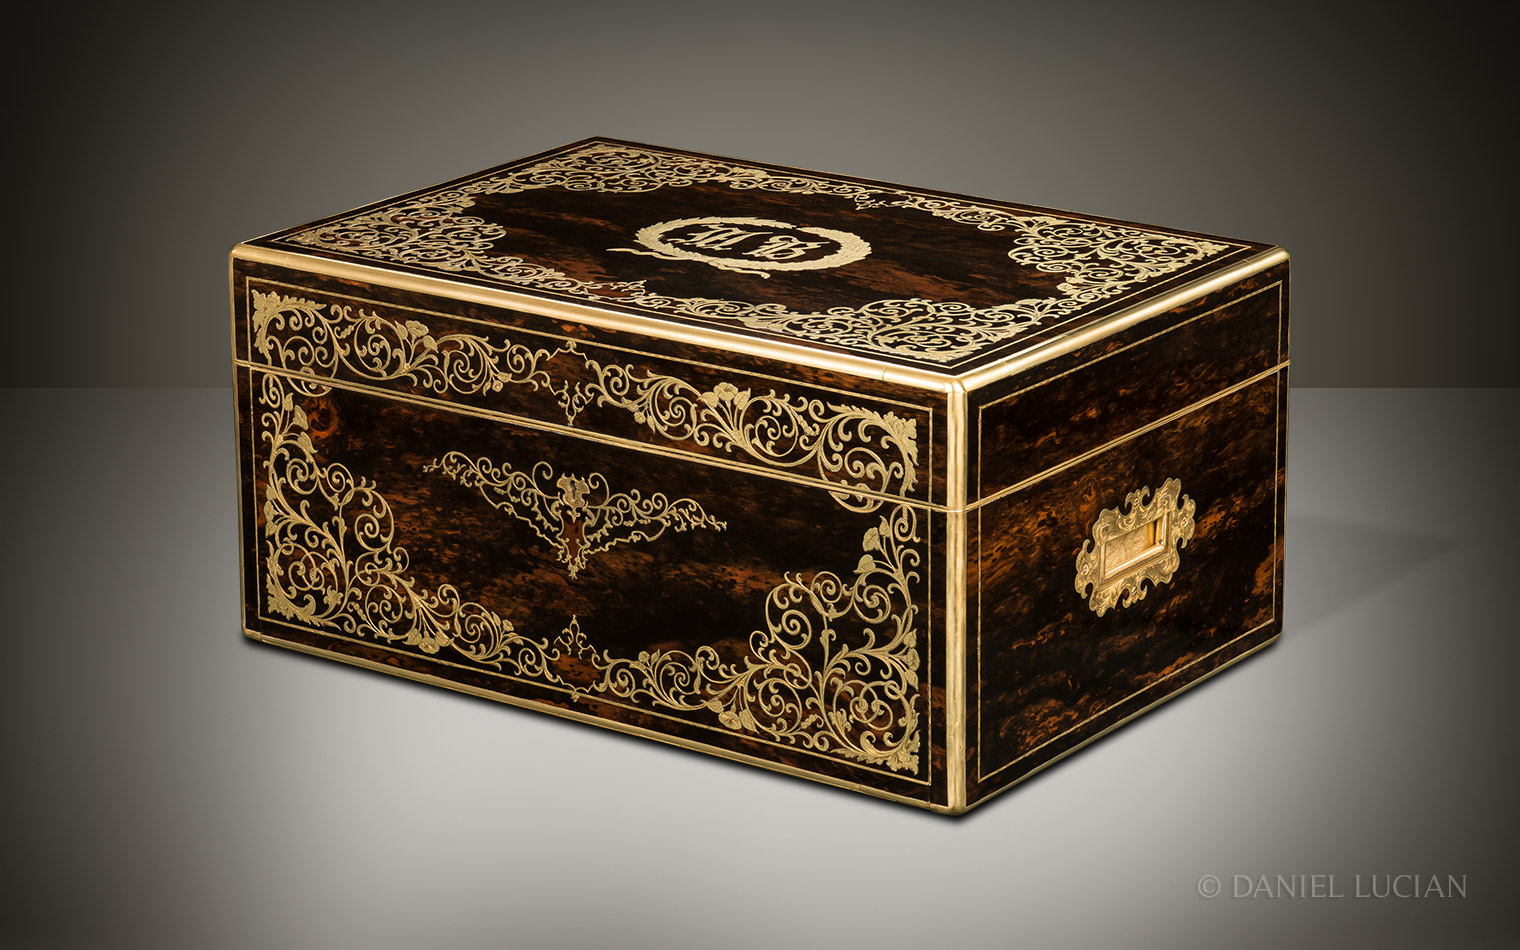 Magnificent Antique Jewellery Box in Coromandel with Engraved Brass Inlay and Concealed Drawer